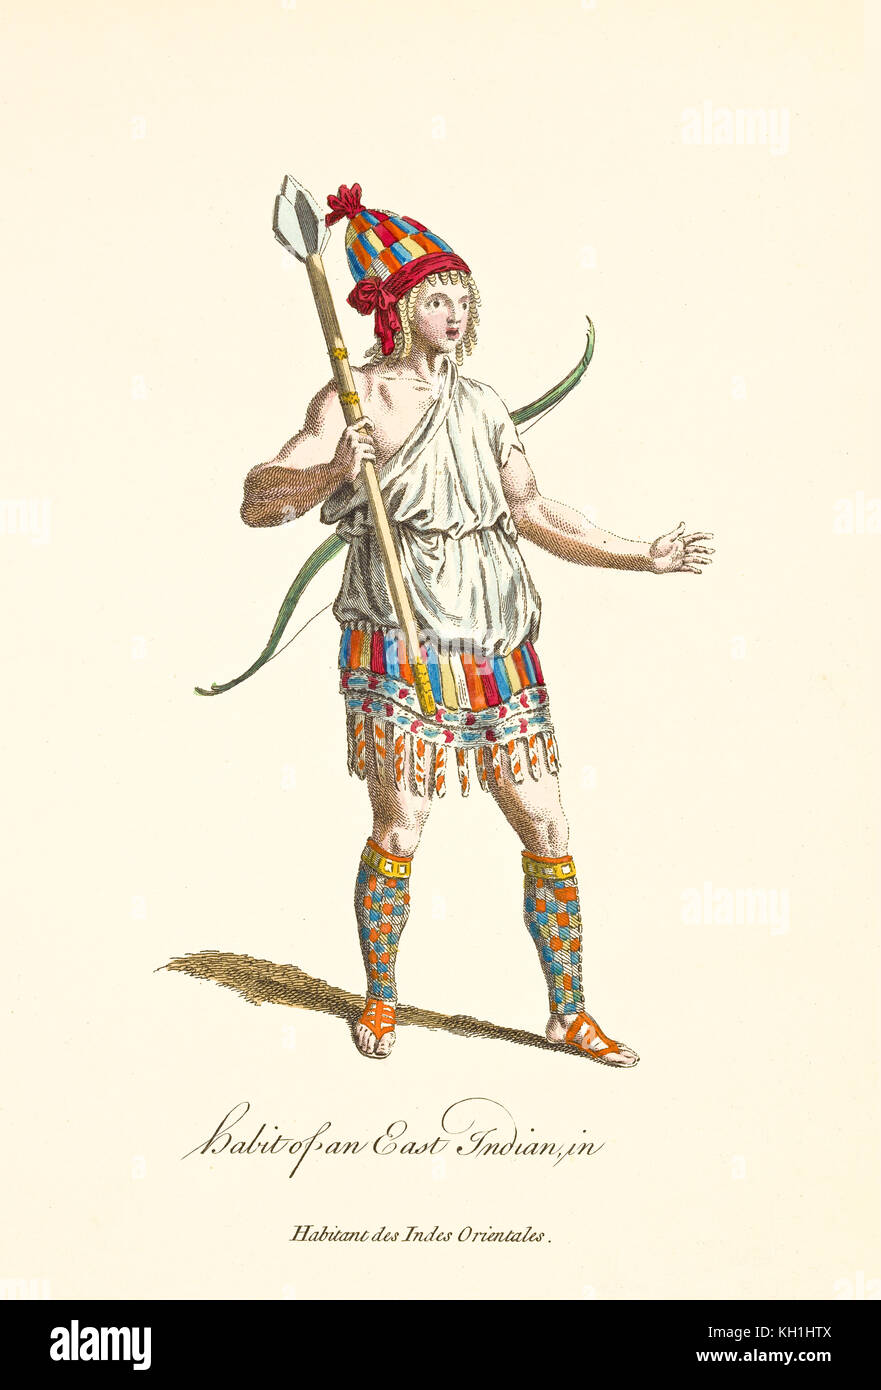 Old illustratiion of East Indian in traditional dresses. By J.M. Vien, publ. T. Jefferys, London, 1757-1772 Stock Photo